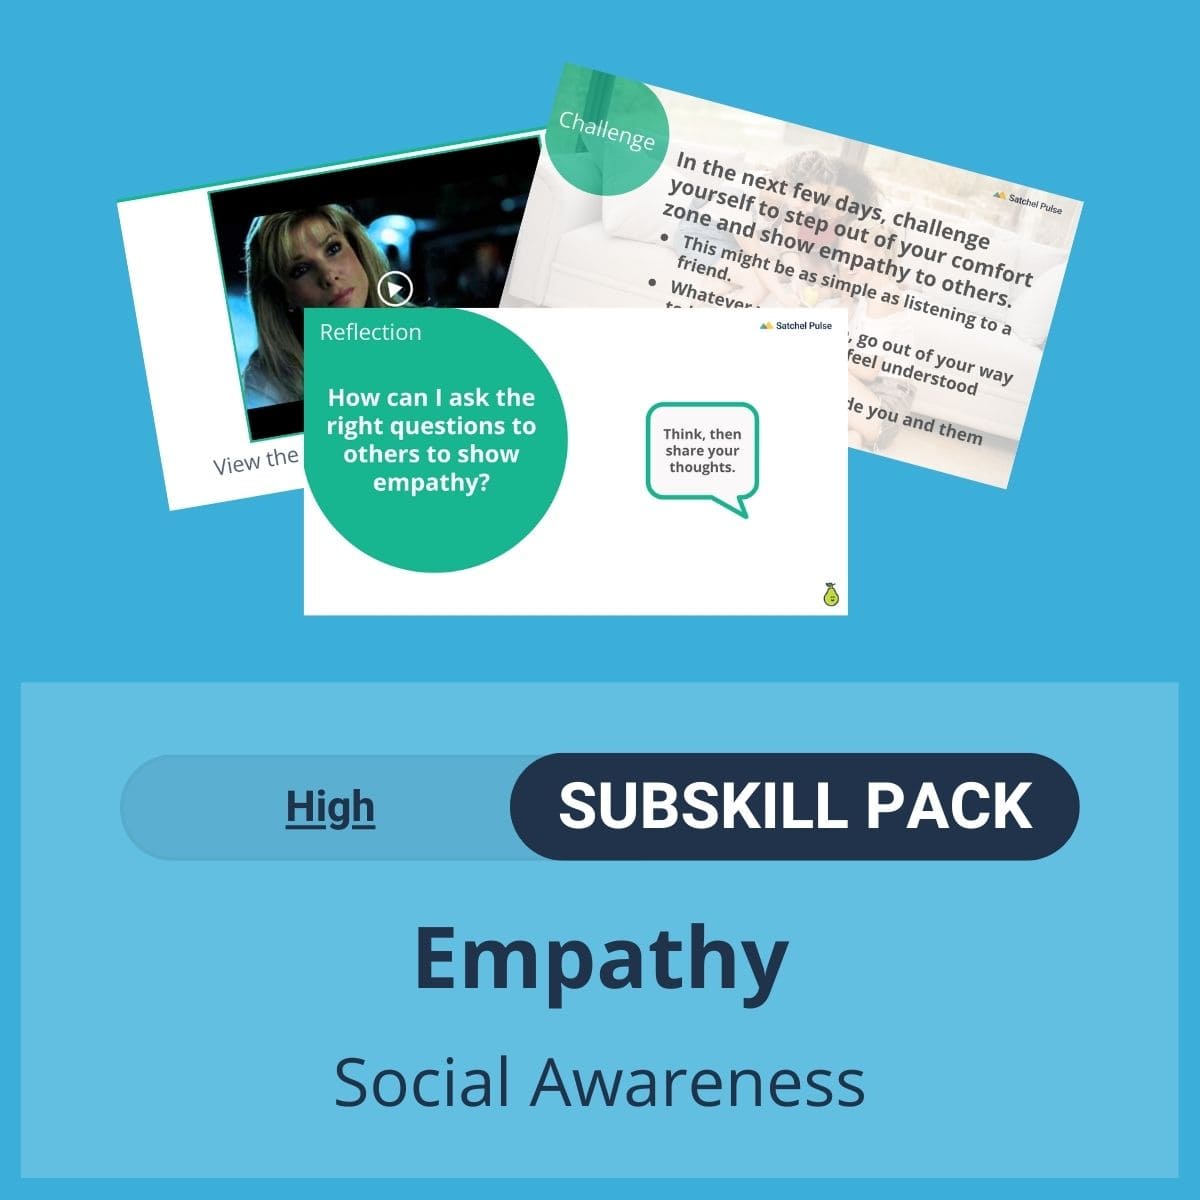 SEL Resource pack with social-emotional learning lessons and self-studies to help you teach Empathy in your classroom as a part of the SEL curriculum.